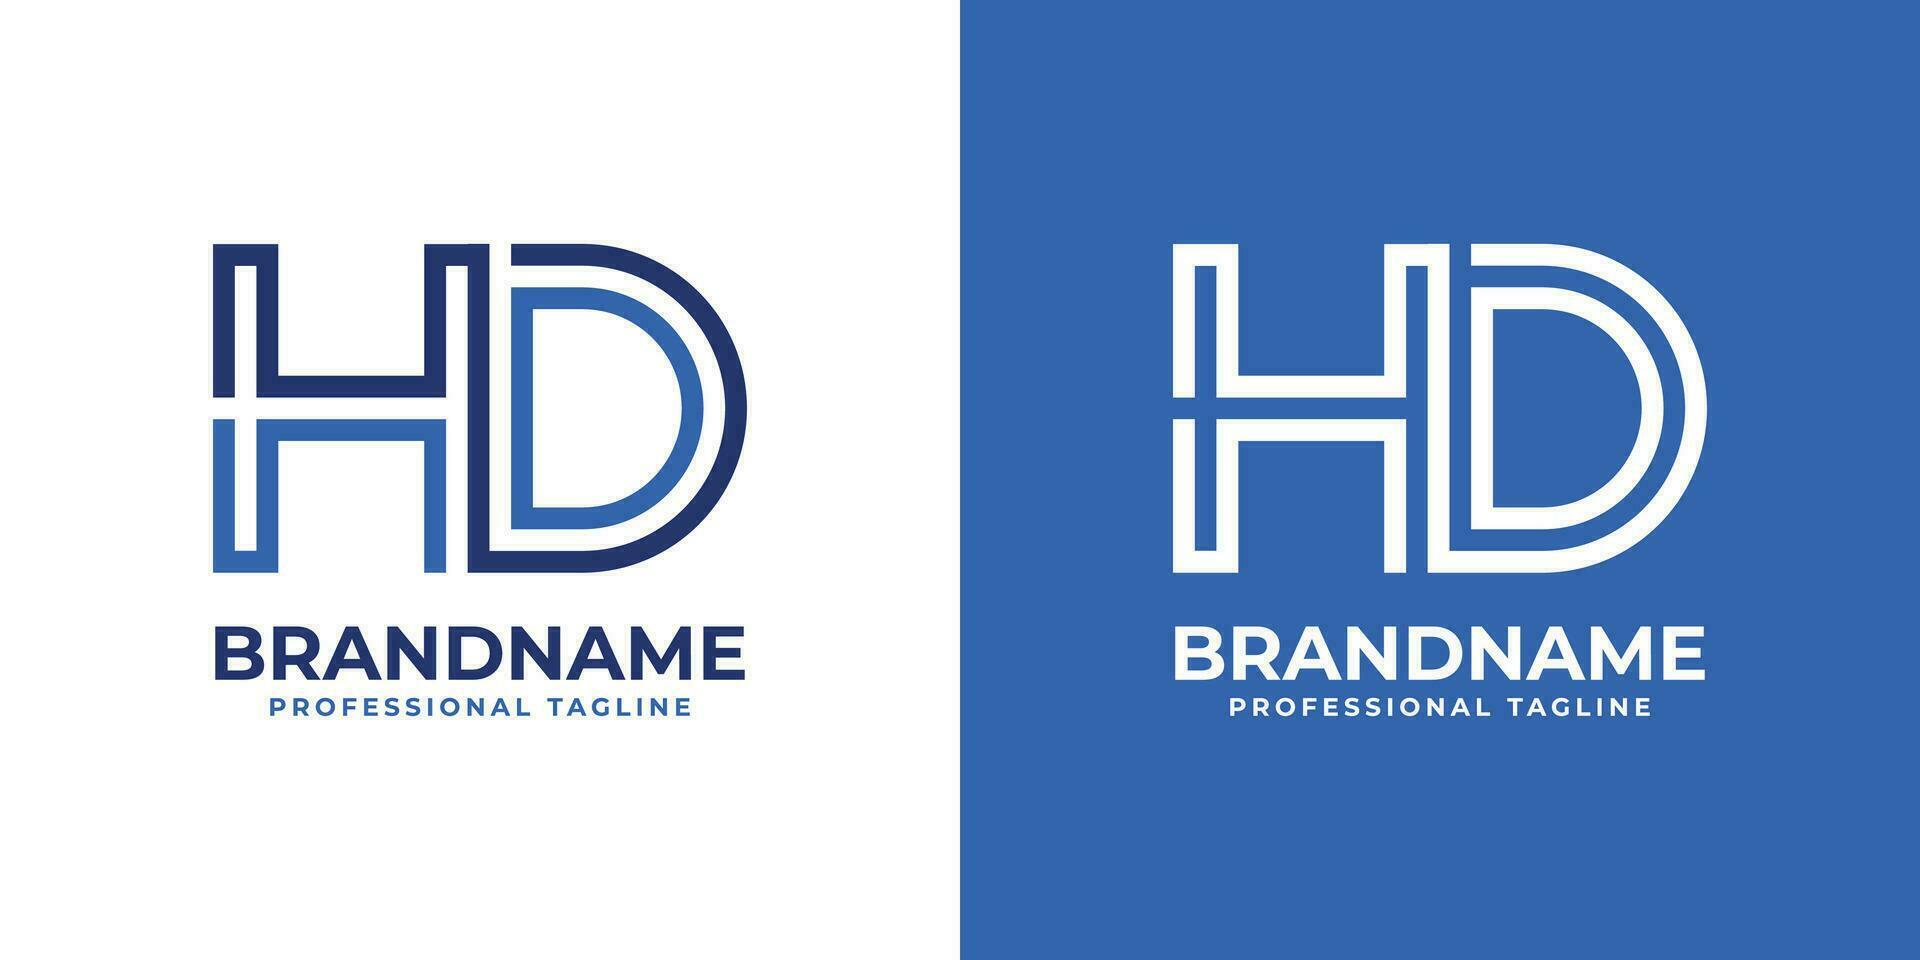 Letter HD Line Monogram Logo, suitable for business with HD or DH